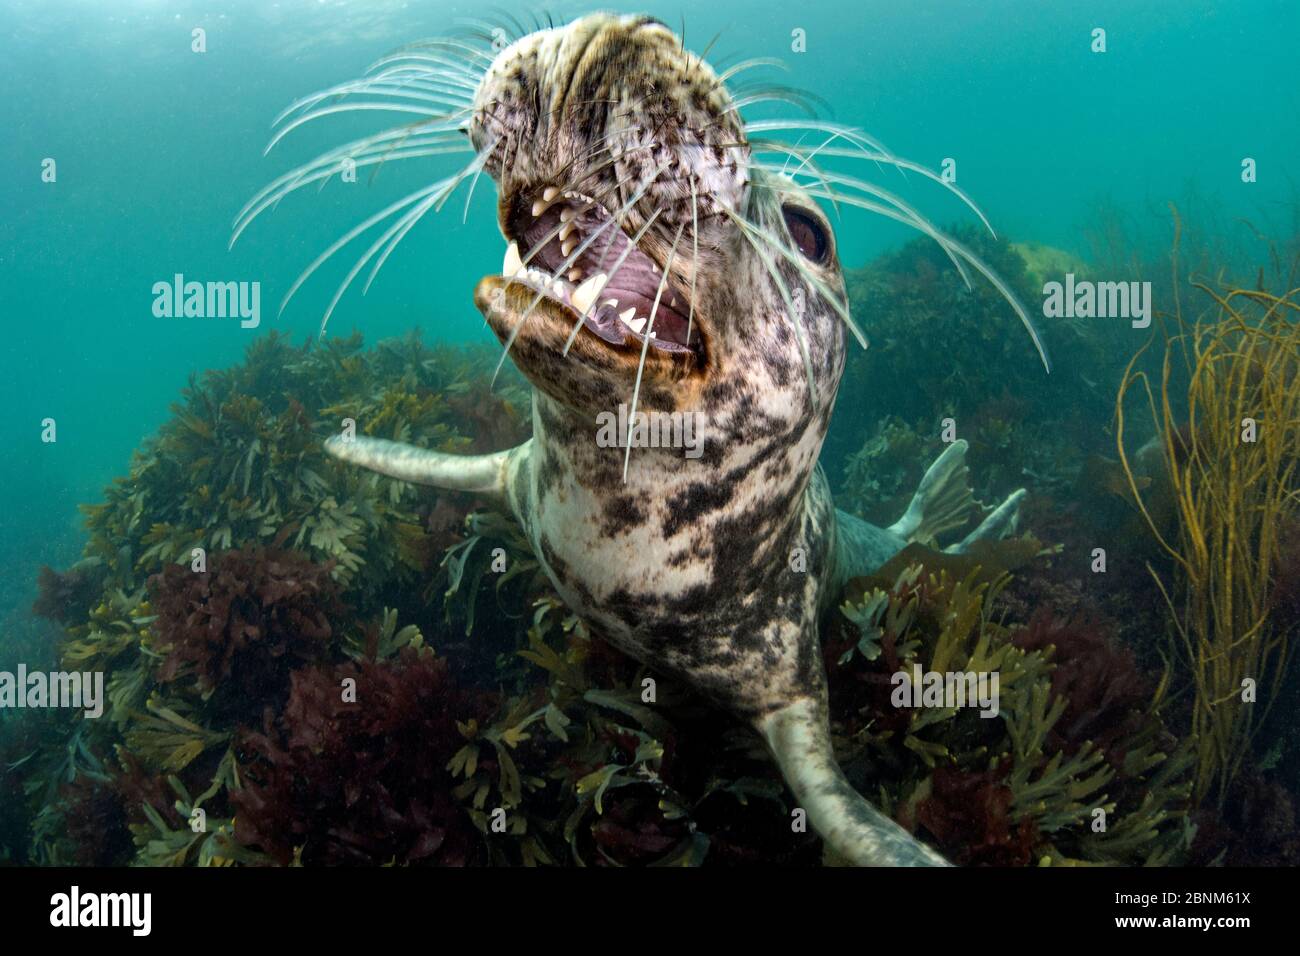 Grey seal (Haichaoerus grypus) young female opens her mouth playfully while she looks up from a bed of shallow seaweeds (Fucus serratus) Lundy Island, Stock Photo